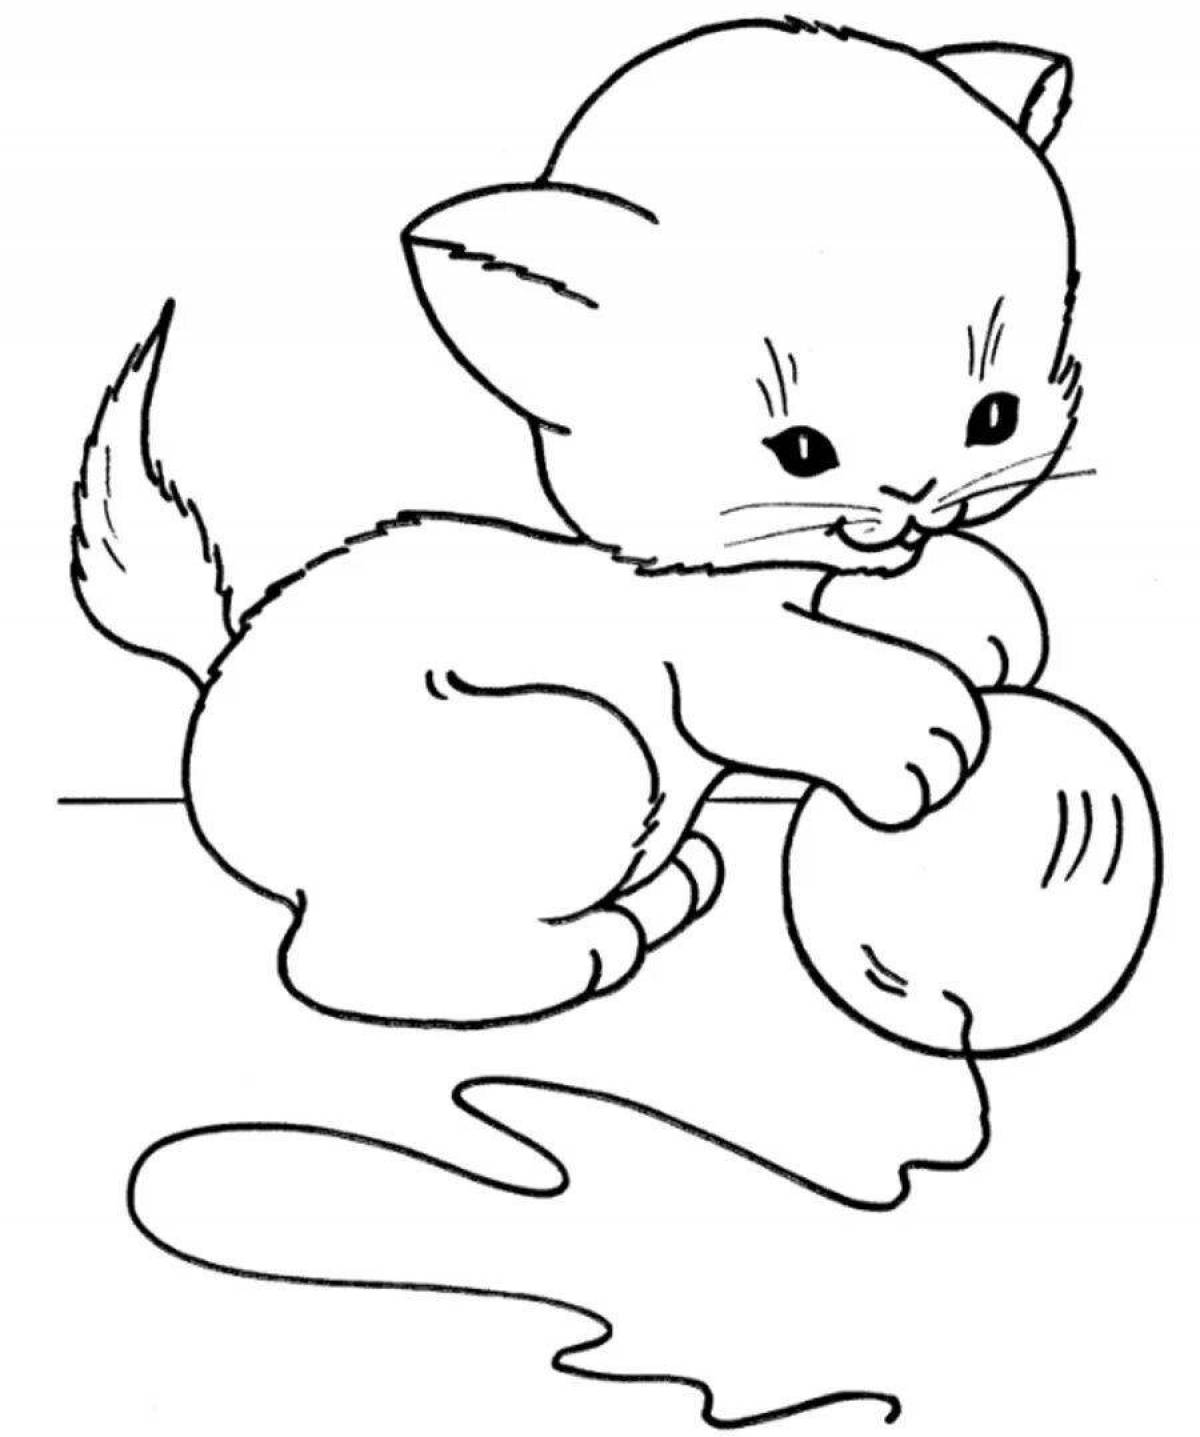 Violent kitty coloring book for kids